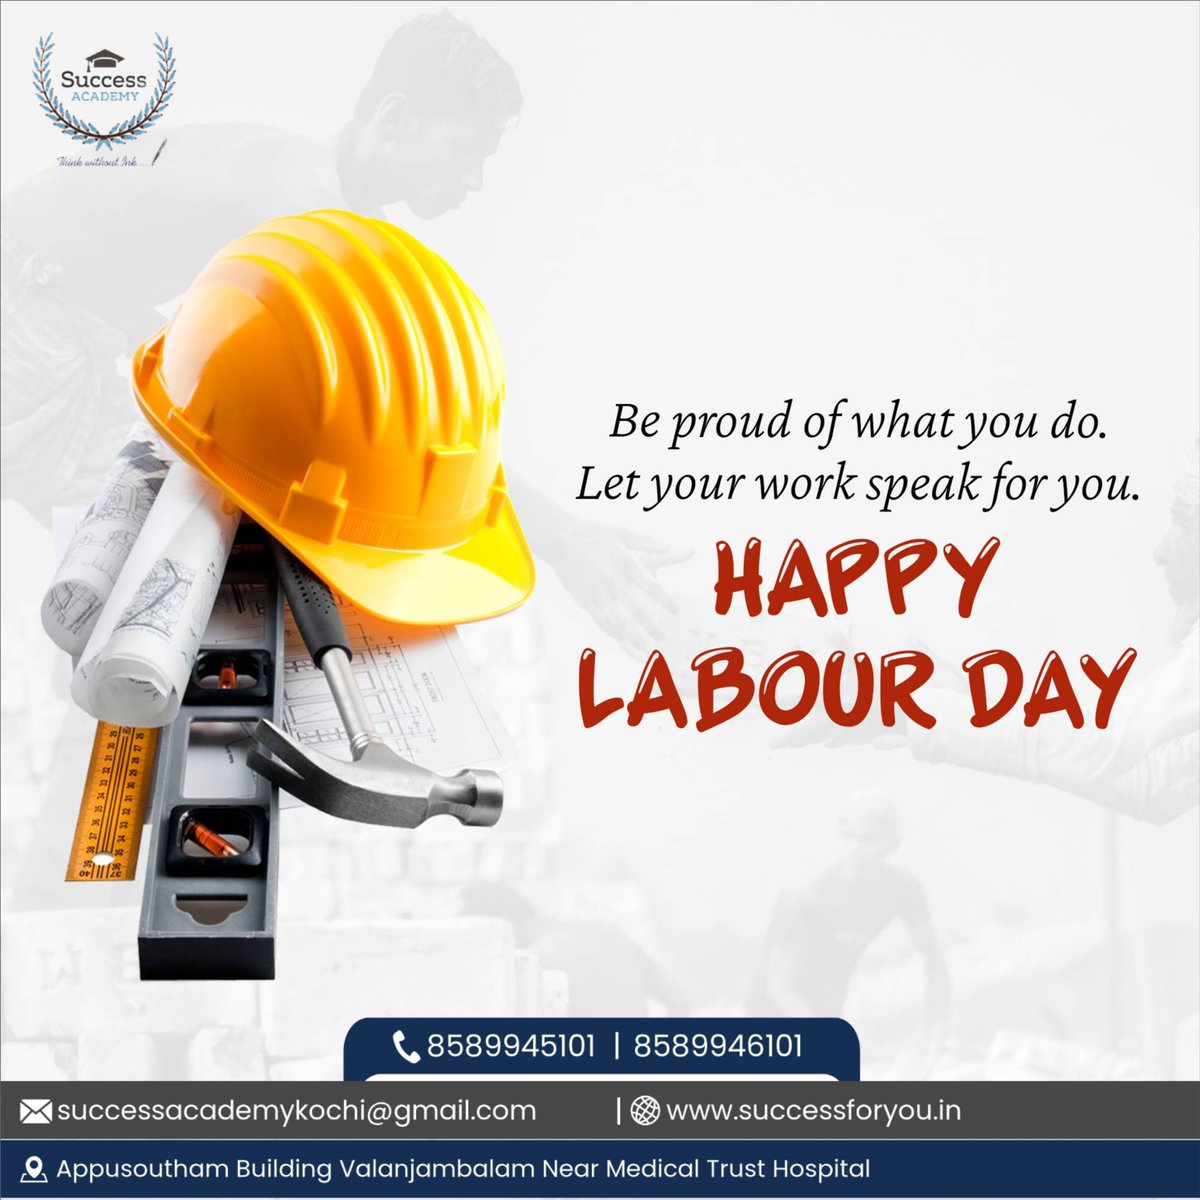 #LabourDay #MayDay #InternationalWorkersDay #Solidarity #WorkersRights #LaborRights #FairWages #UnionStrong #EqualPay #WorkersUnite  #RespectWorkers #LaborMovement #OrganizedLabor #MayDay2024 #WorkersOfTheWorldUnite #SSCCoaching #BankCoaching #SuccessAcademyKochi